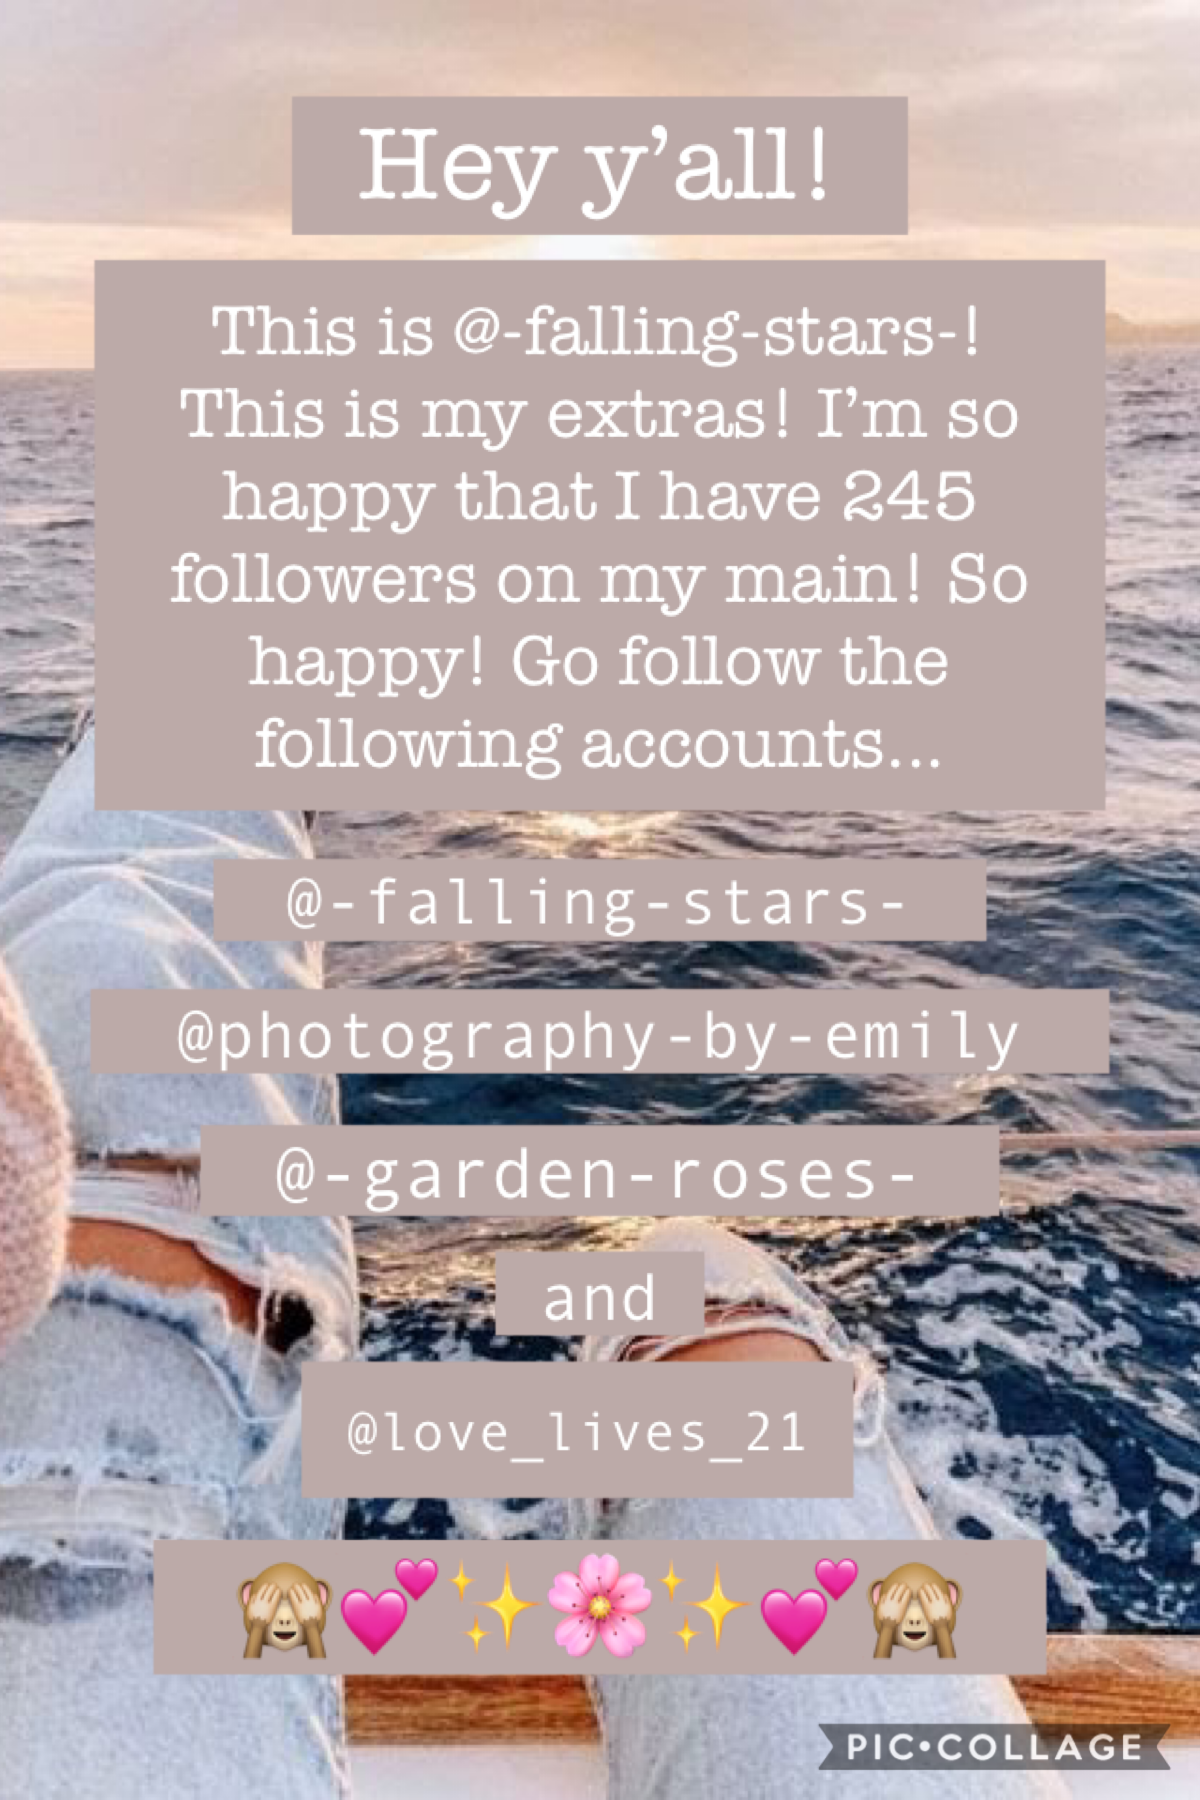 Extras acc for @-falling-stars-!